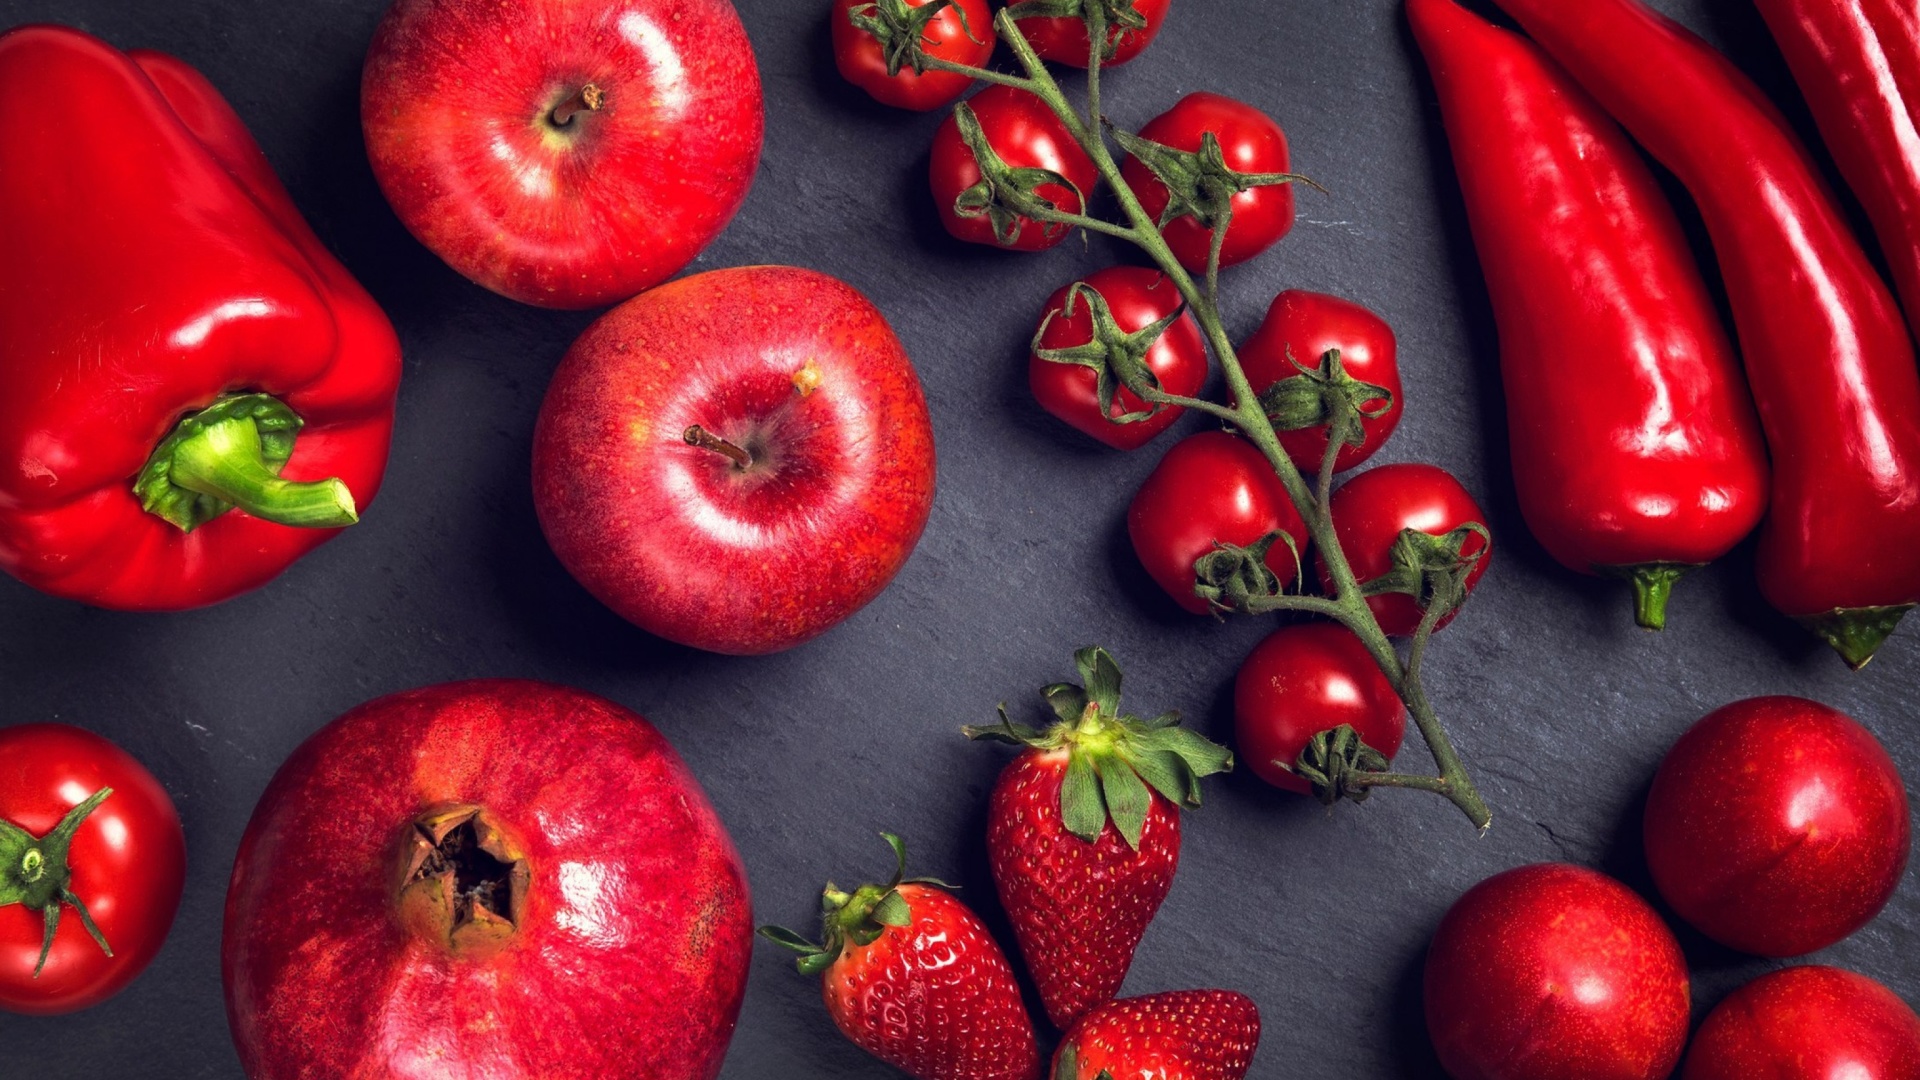 Red fruits and vegetables screenshot #1 1920x1080